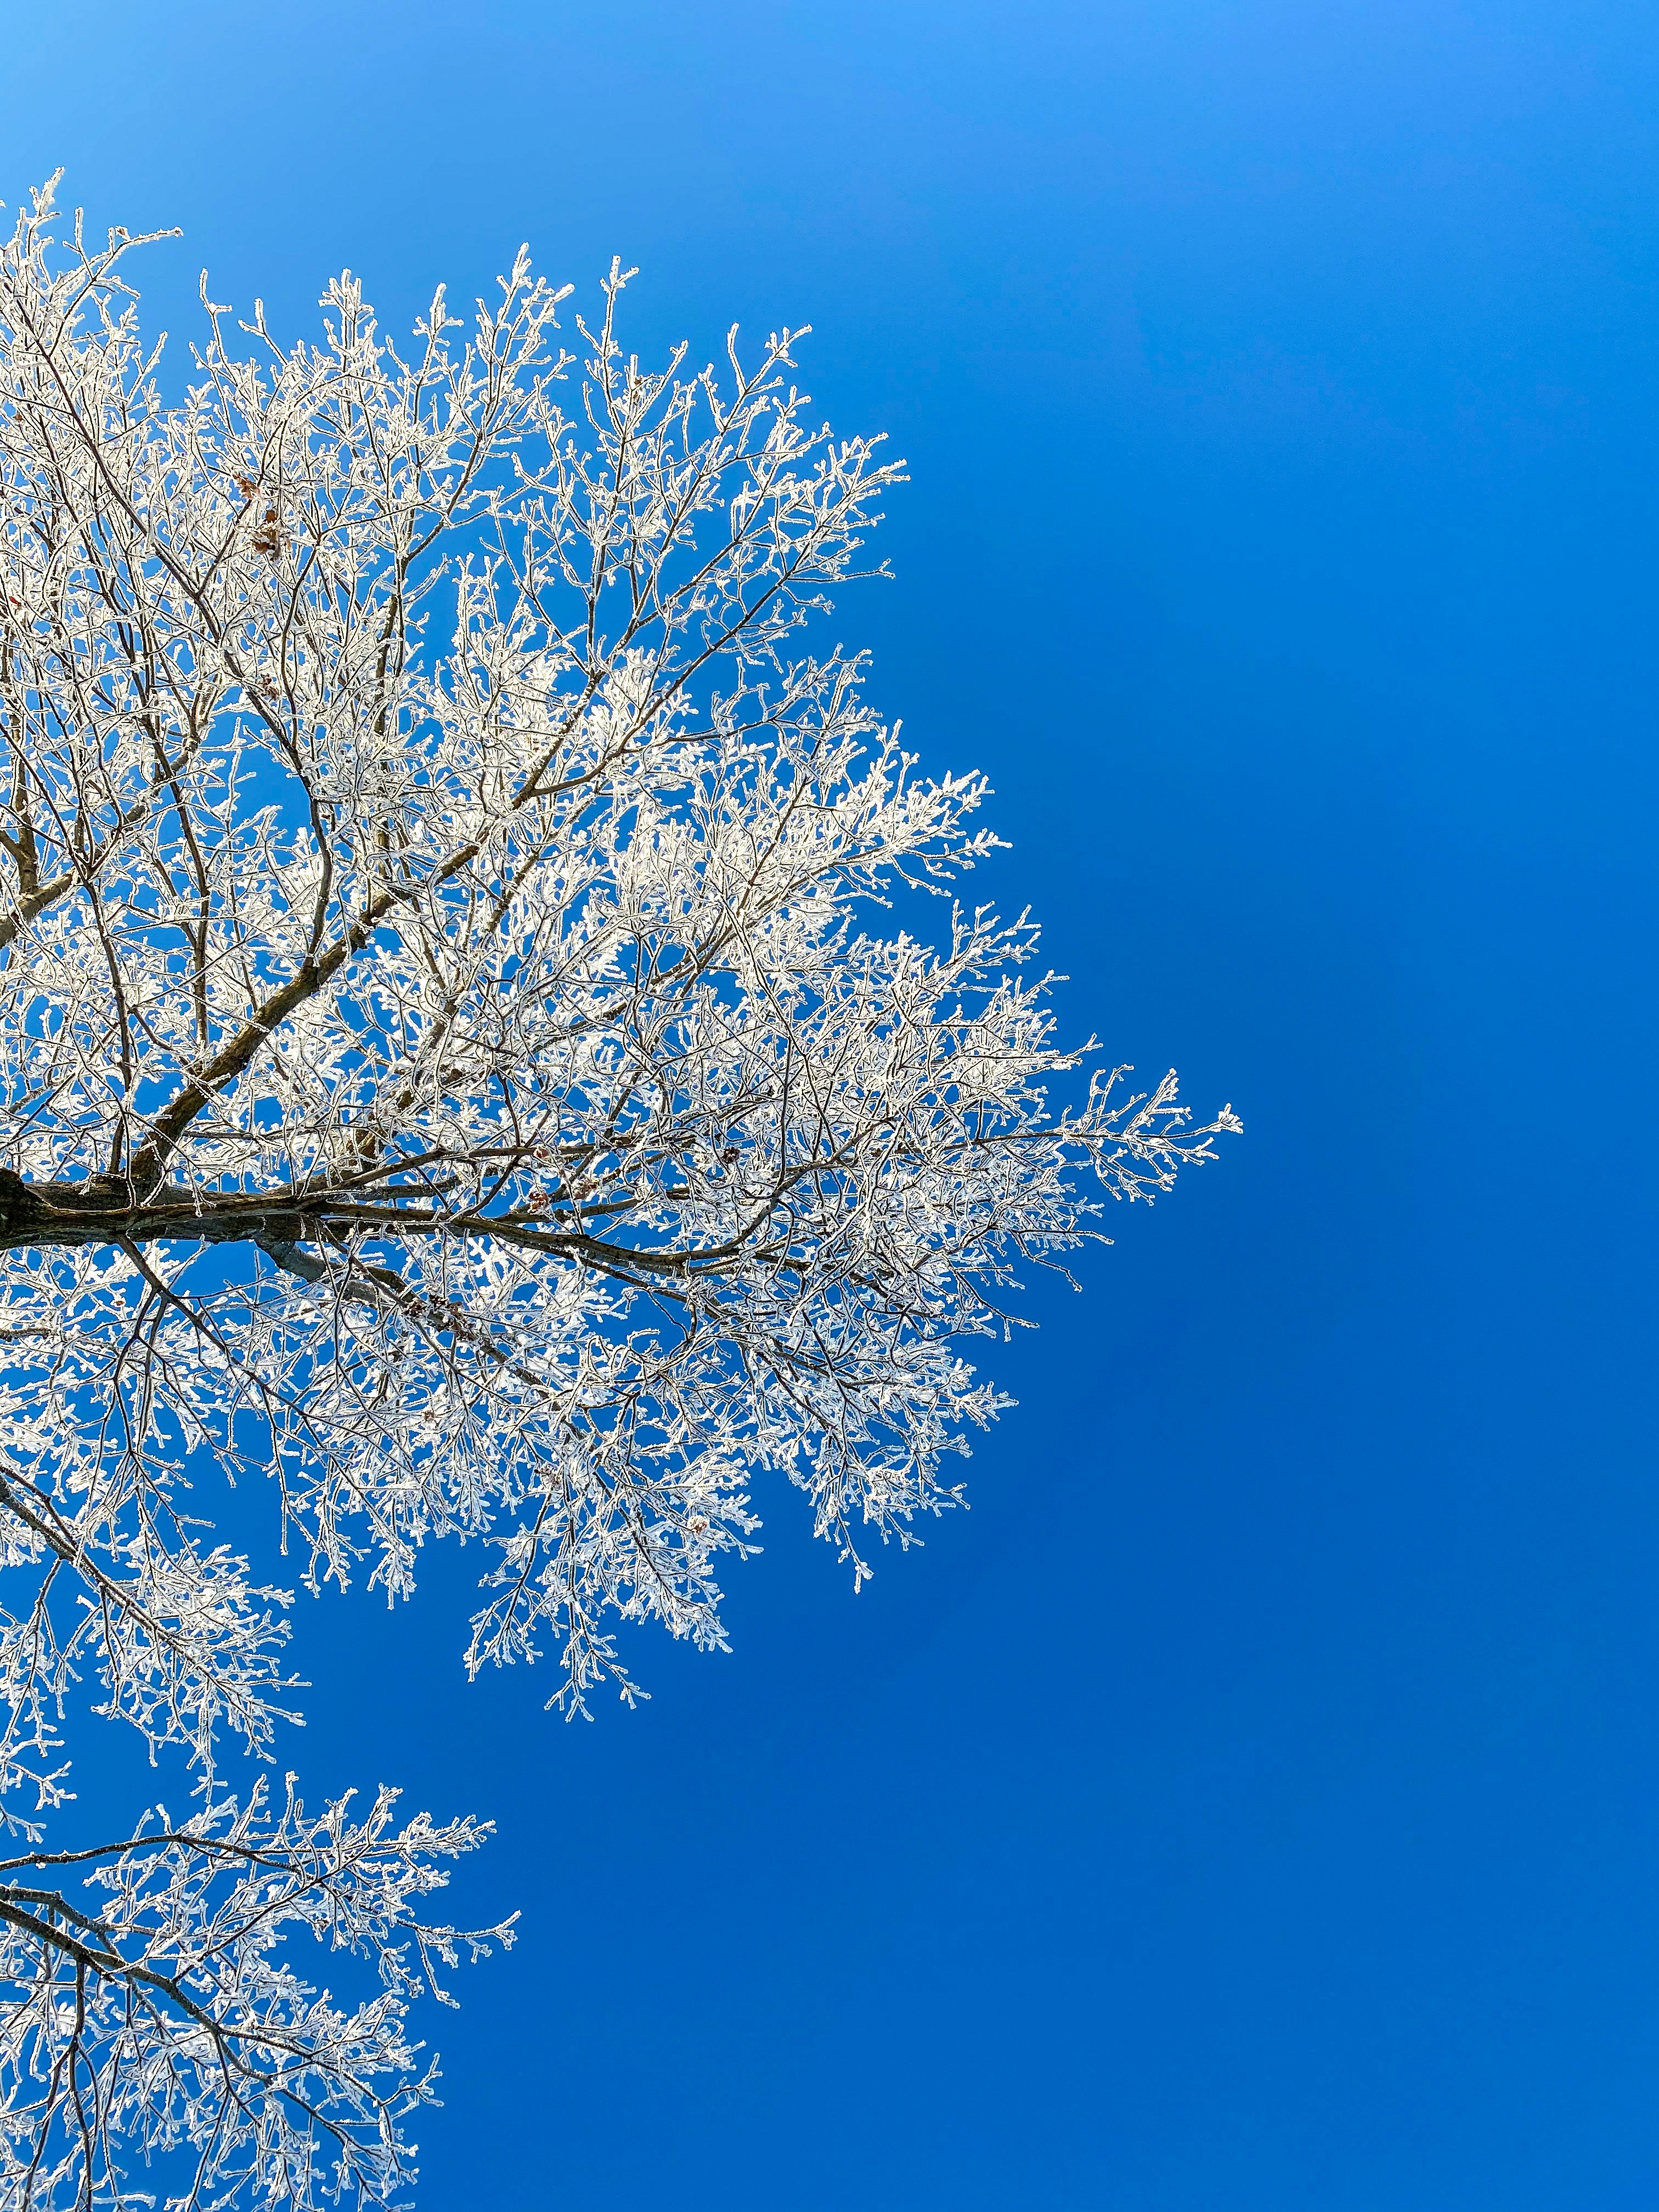 white and brown tree under blue sky during daytime